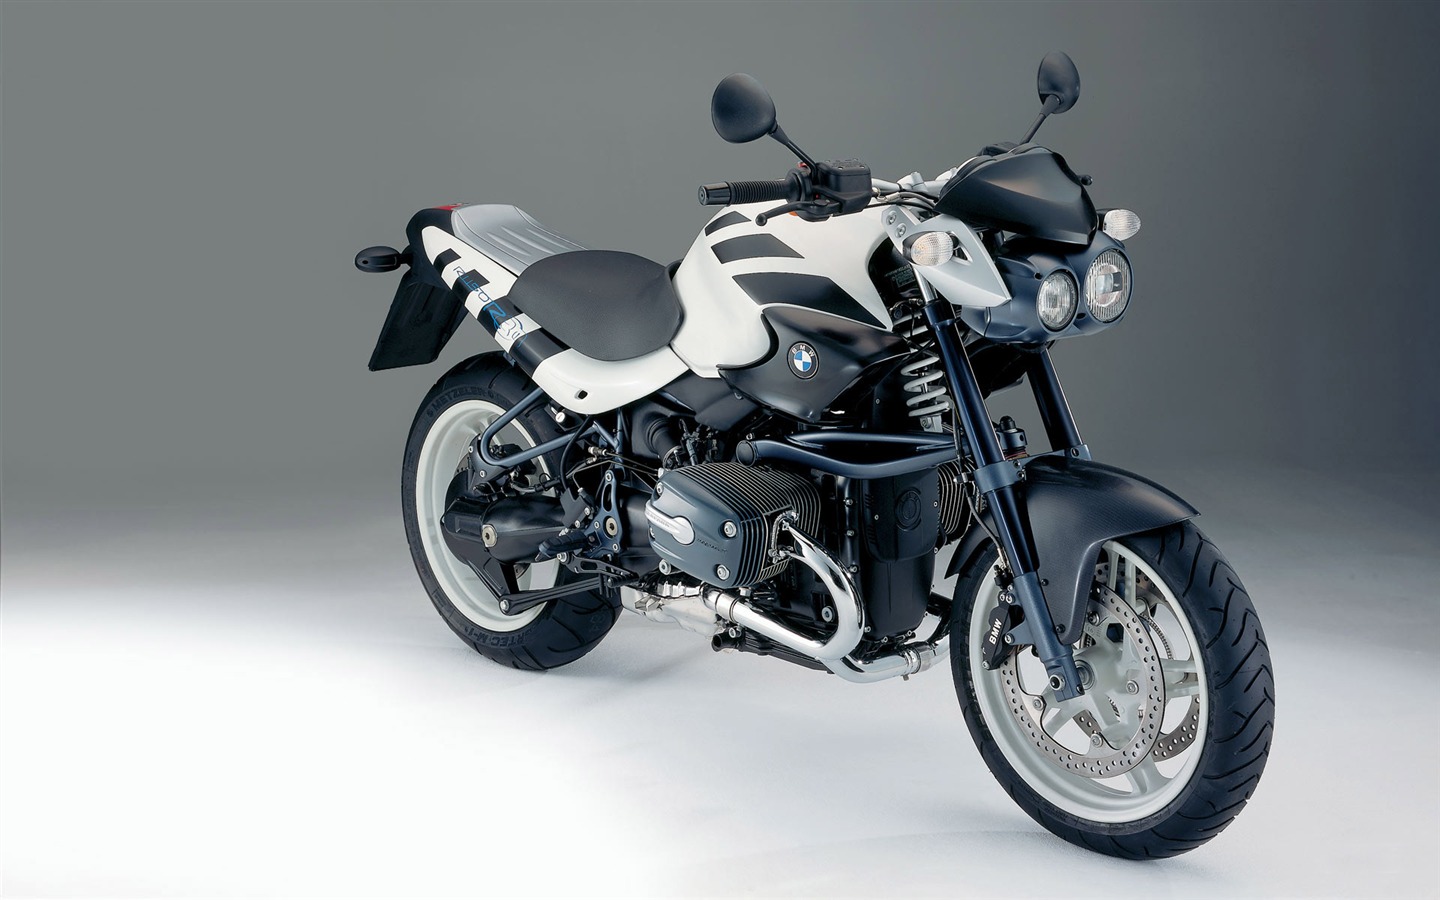 BMW motorcycle wallpapers (2) #3 - 1440x900